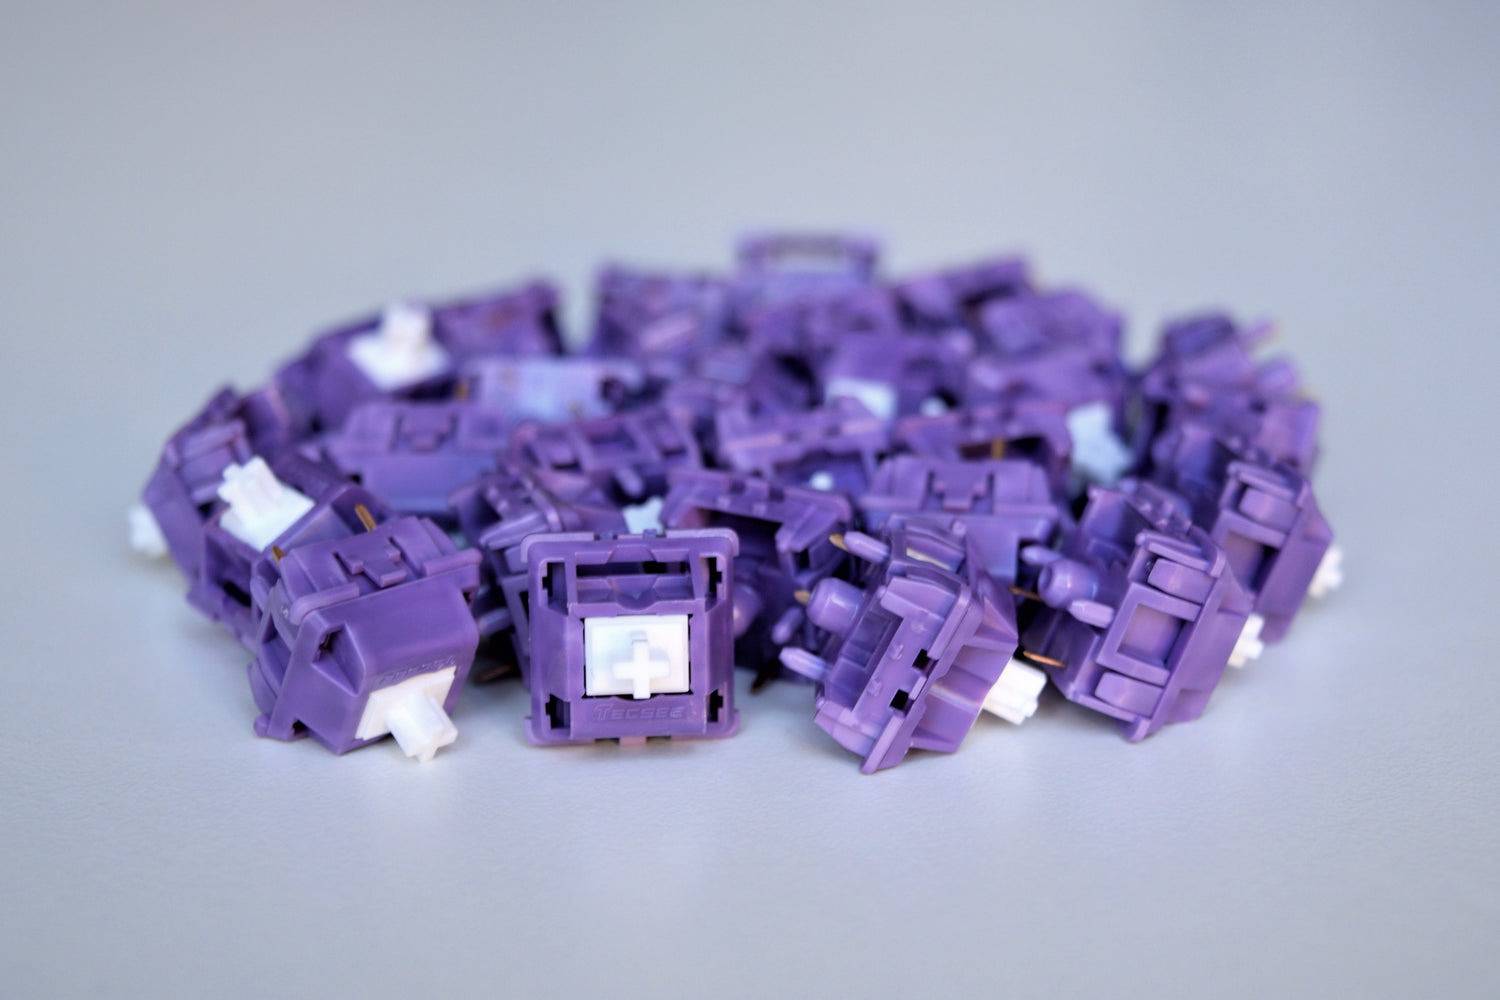 Group view of the Tecsee Purple Panda Tactile Switches